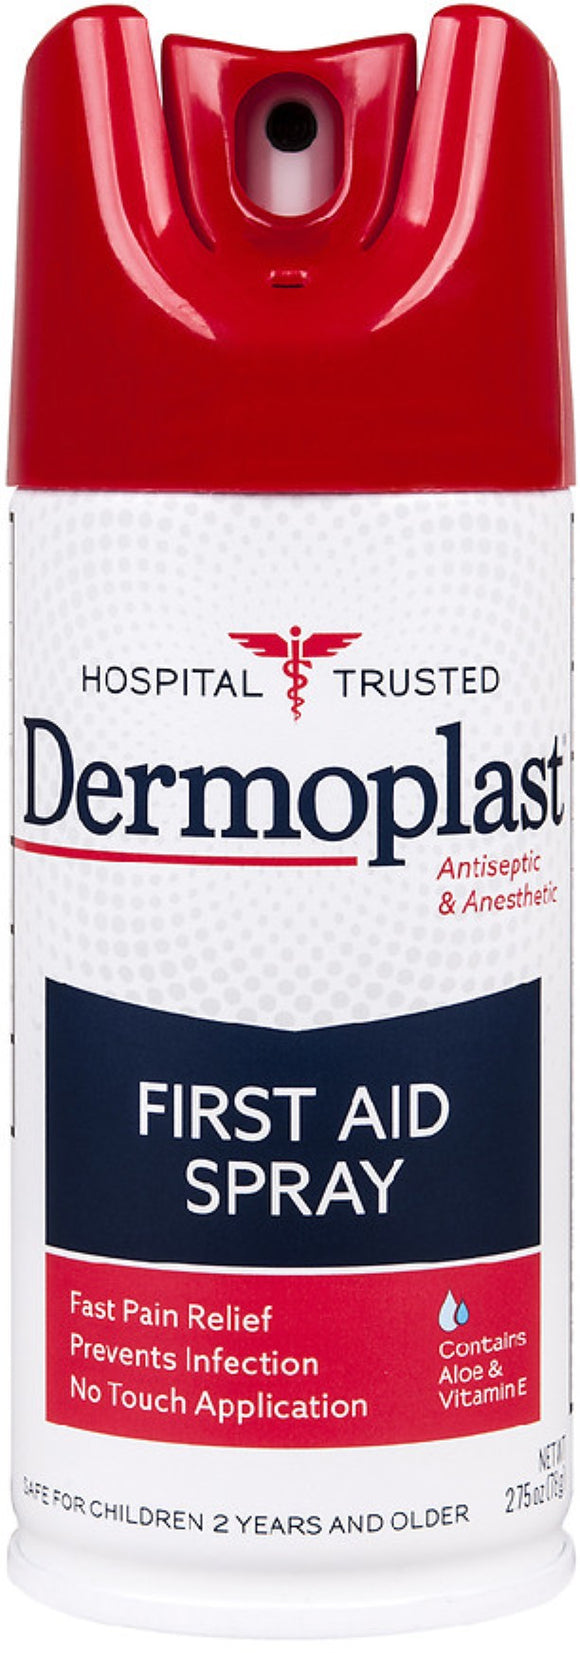 Dermoplast Brand First Aid Antibacterial Pain Relieving Spray, 2.75 oz (78g)  急救抗菌喷雾剂